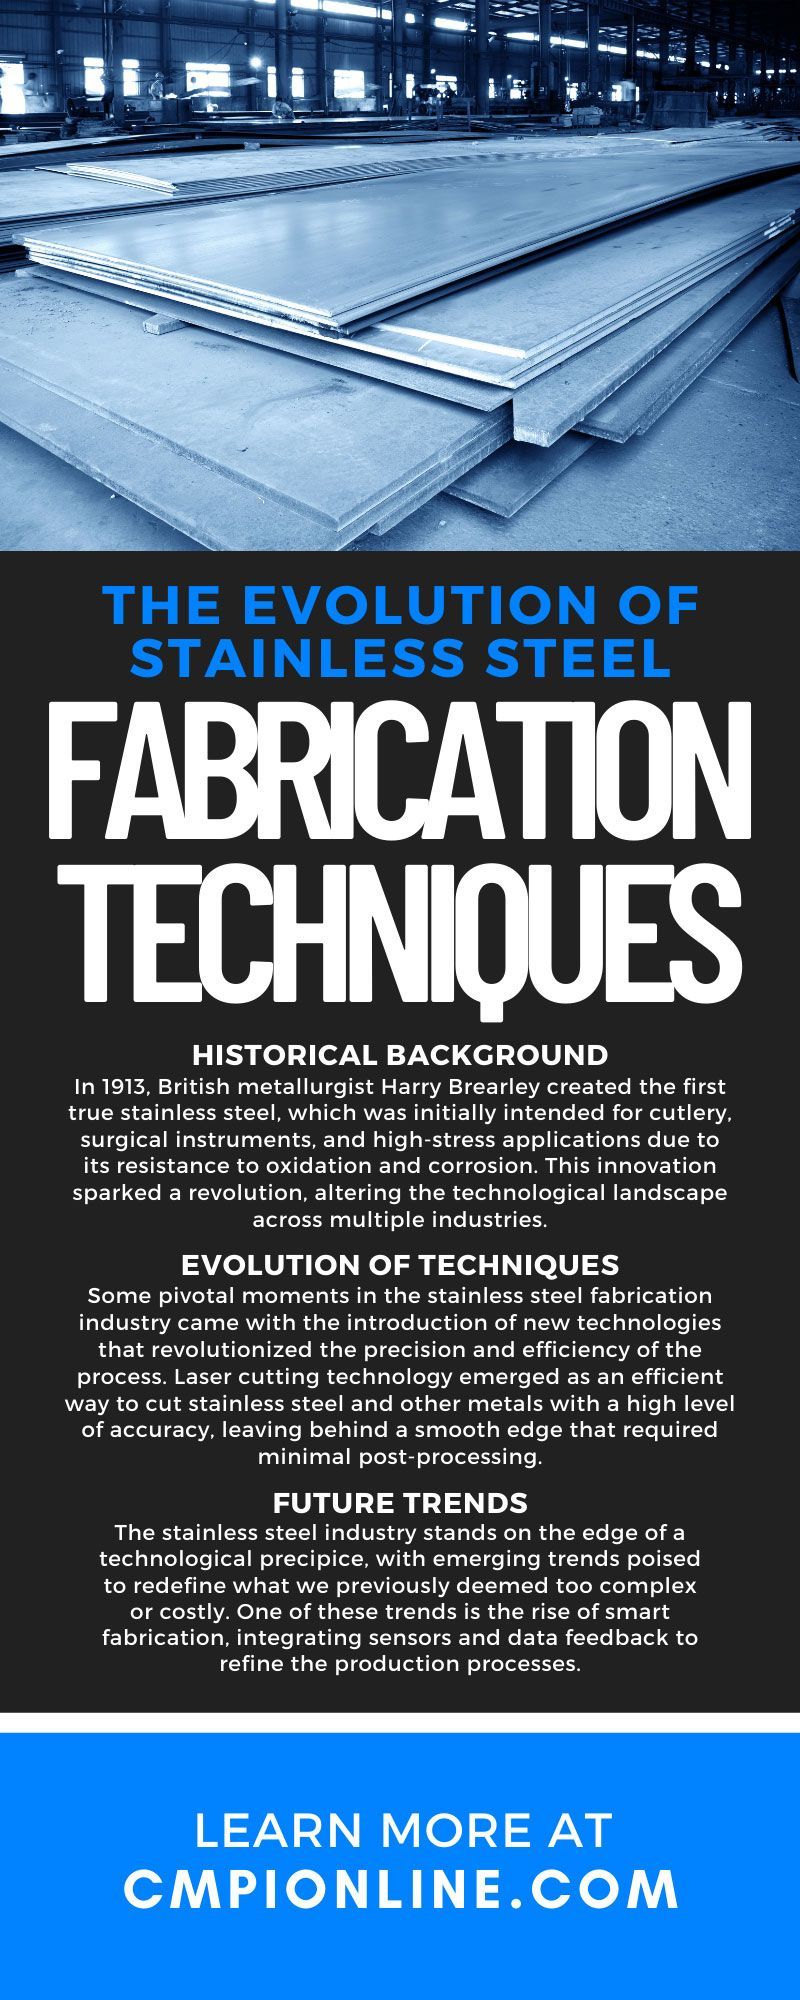 The Evolution of Stainless Steel Fabrication Techniques